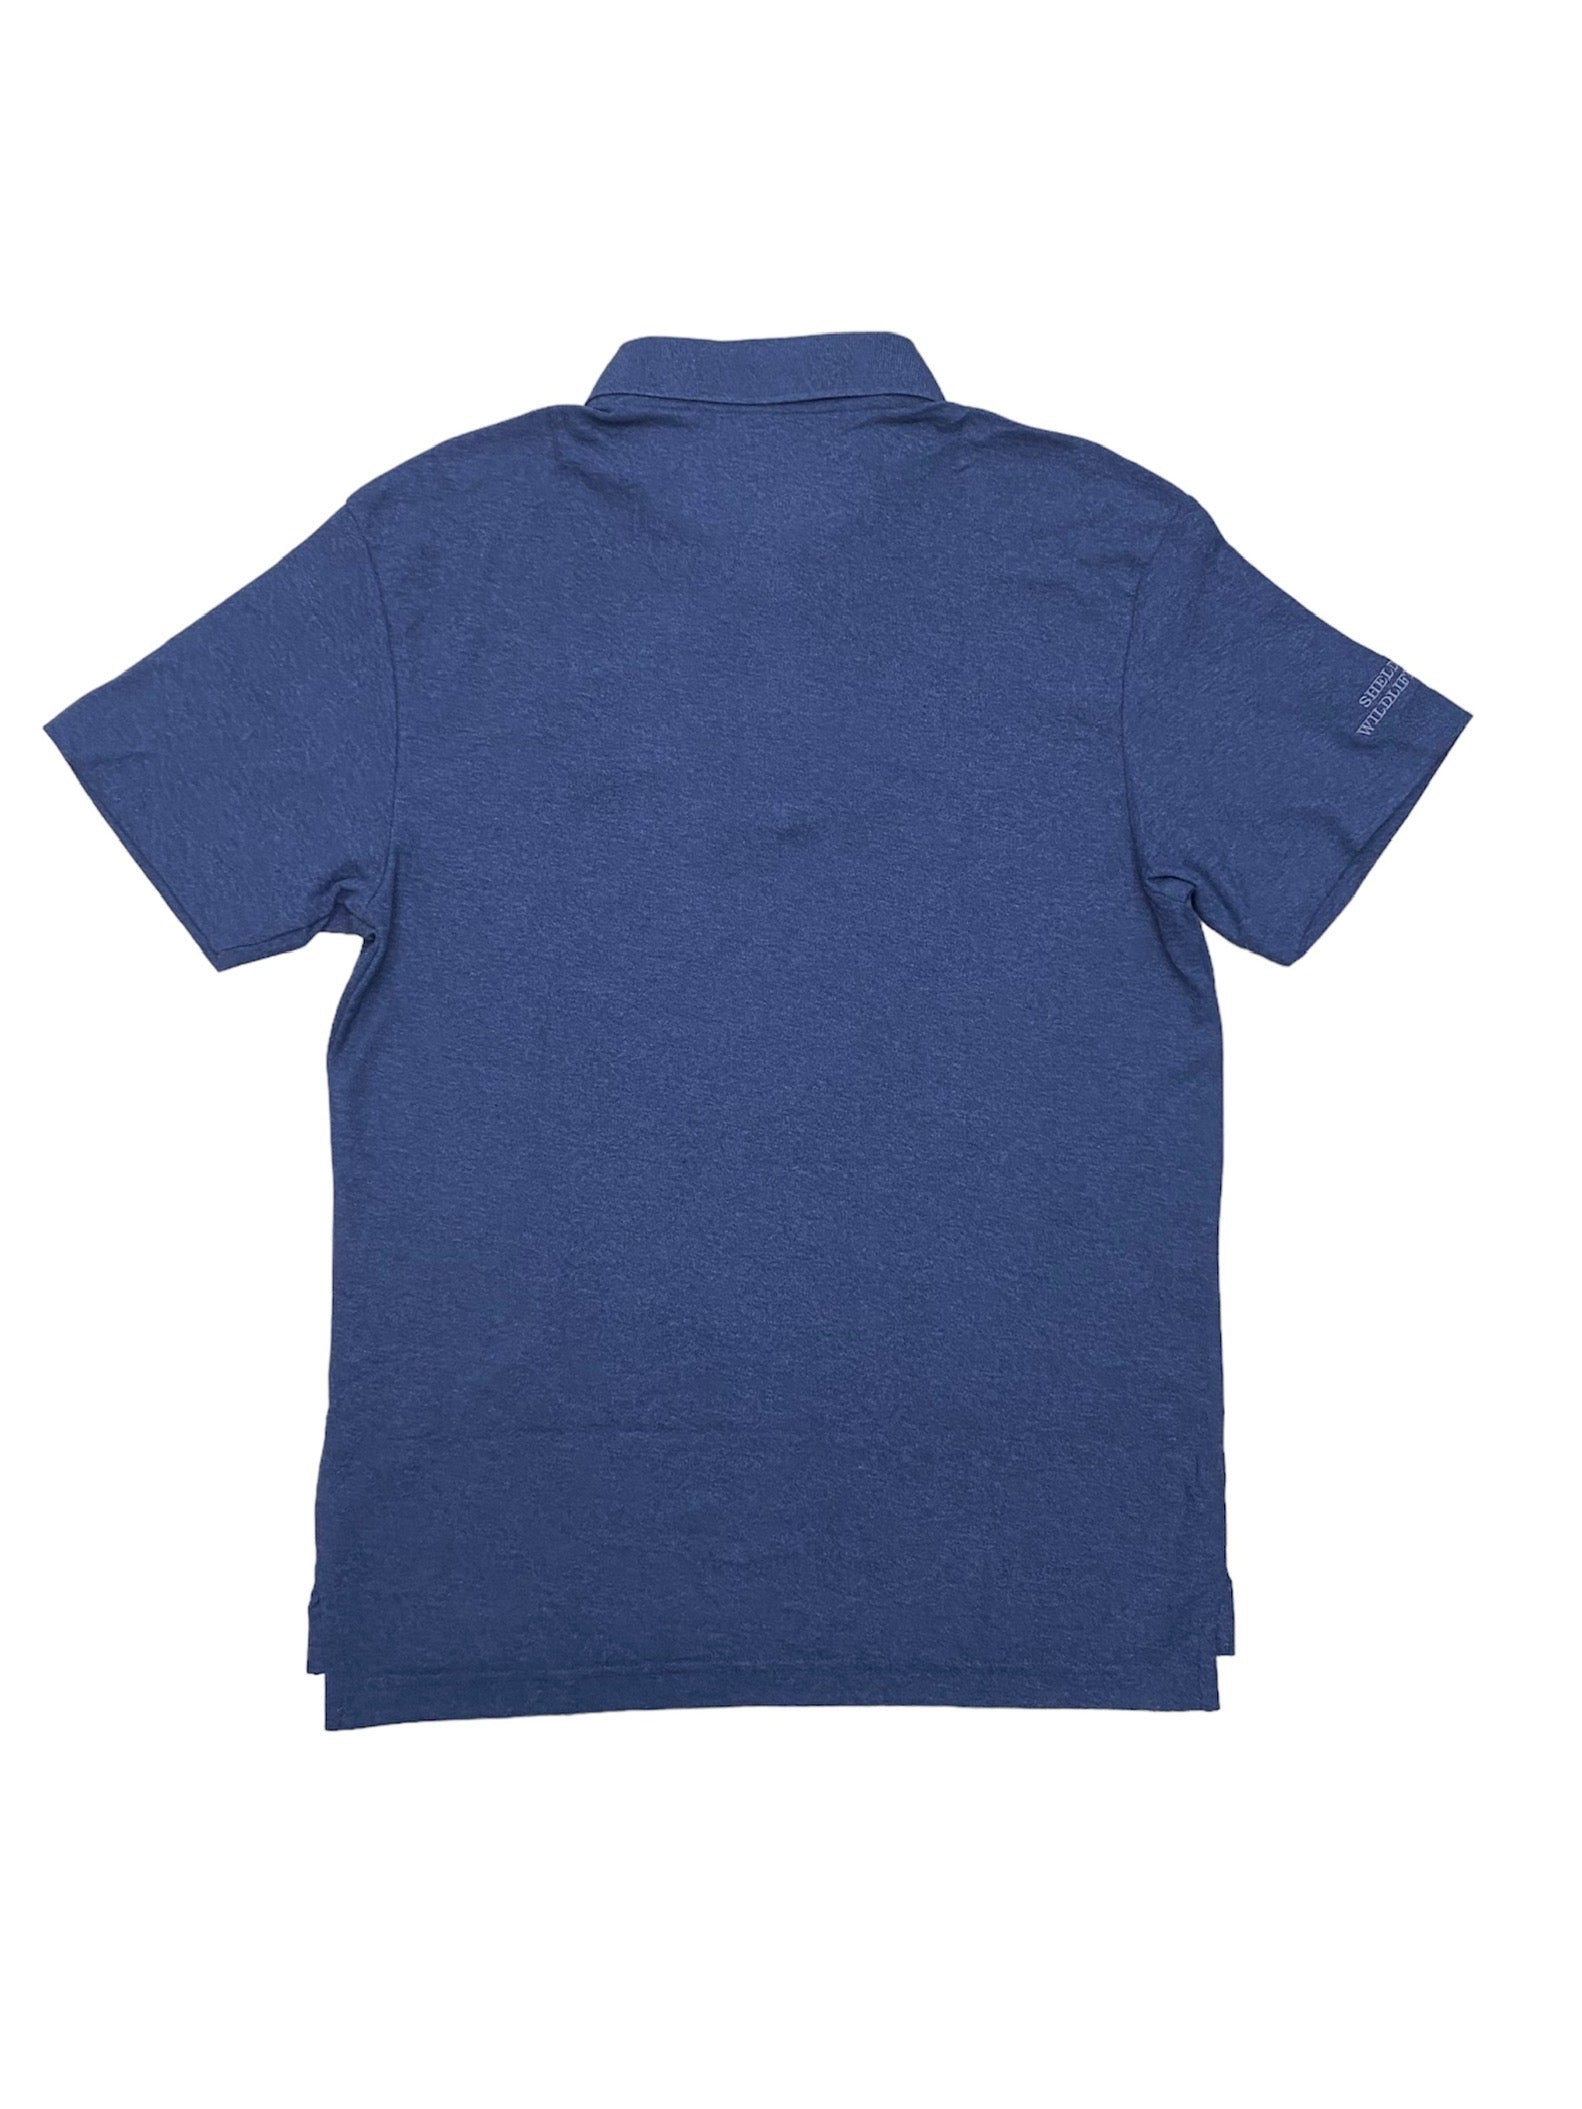 Embroidered Men's Polo Shirt- Blue